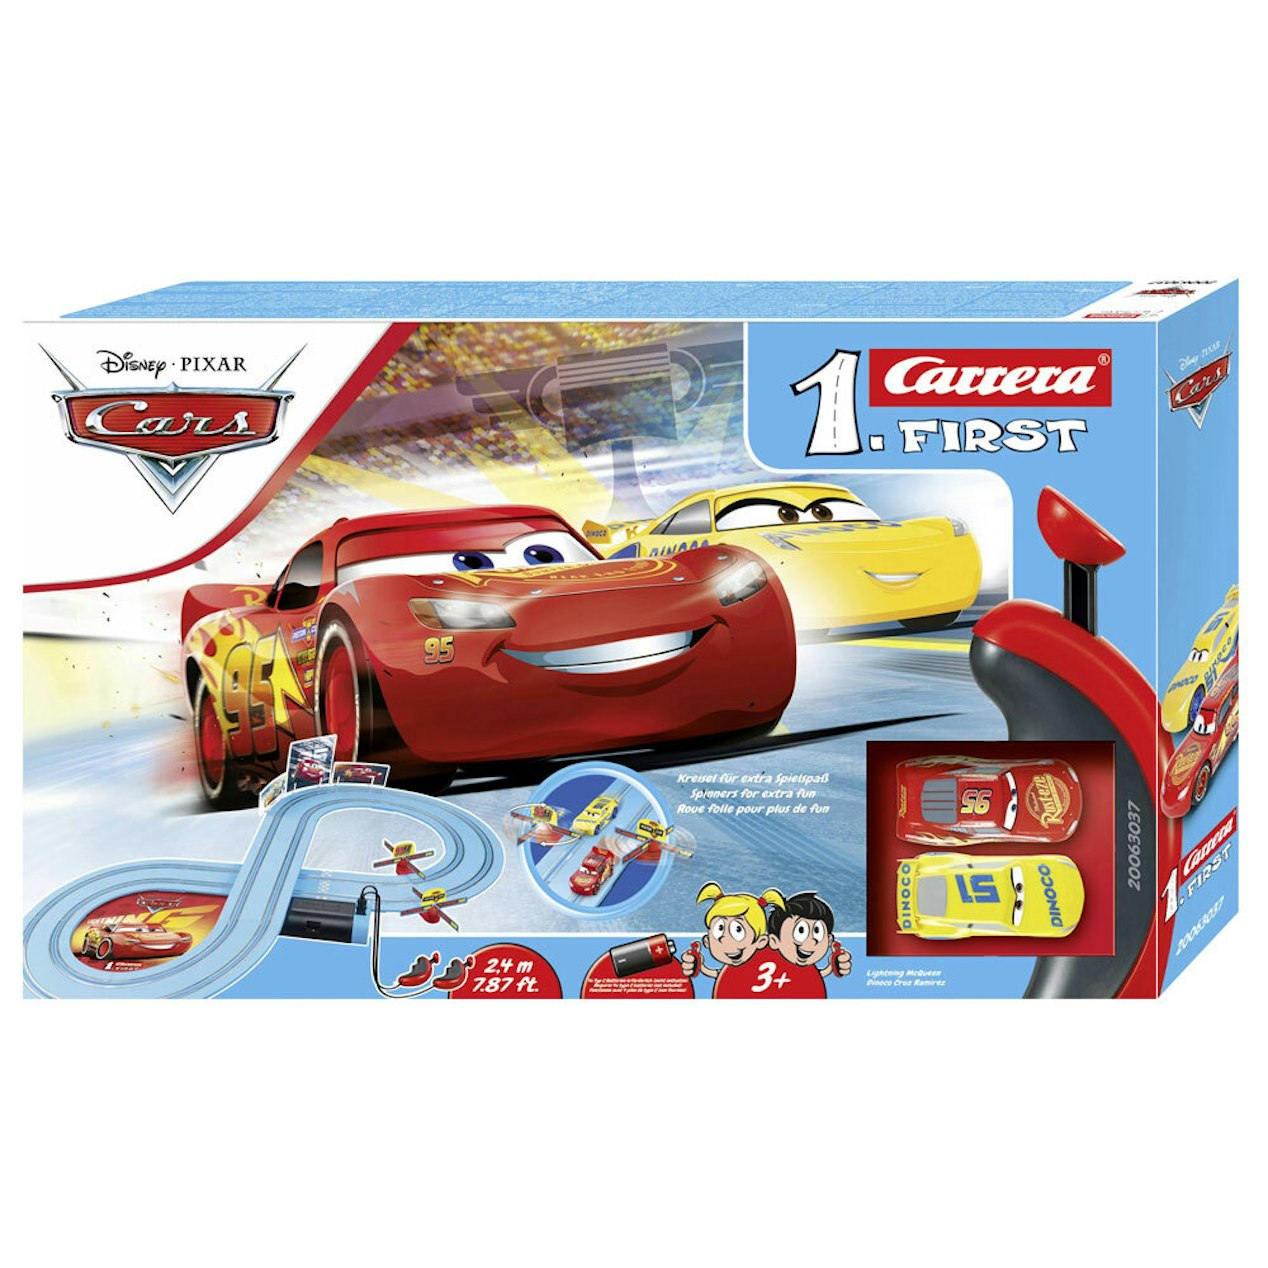 Carrera Cars First 1:50 Vehicle Car/Race Track Set 3y+ Kids/Children Racing  Toy - Onceit